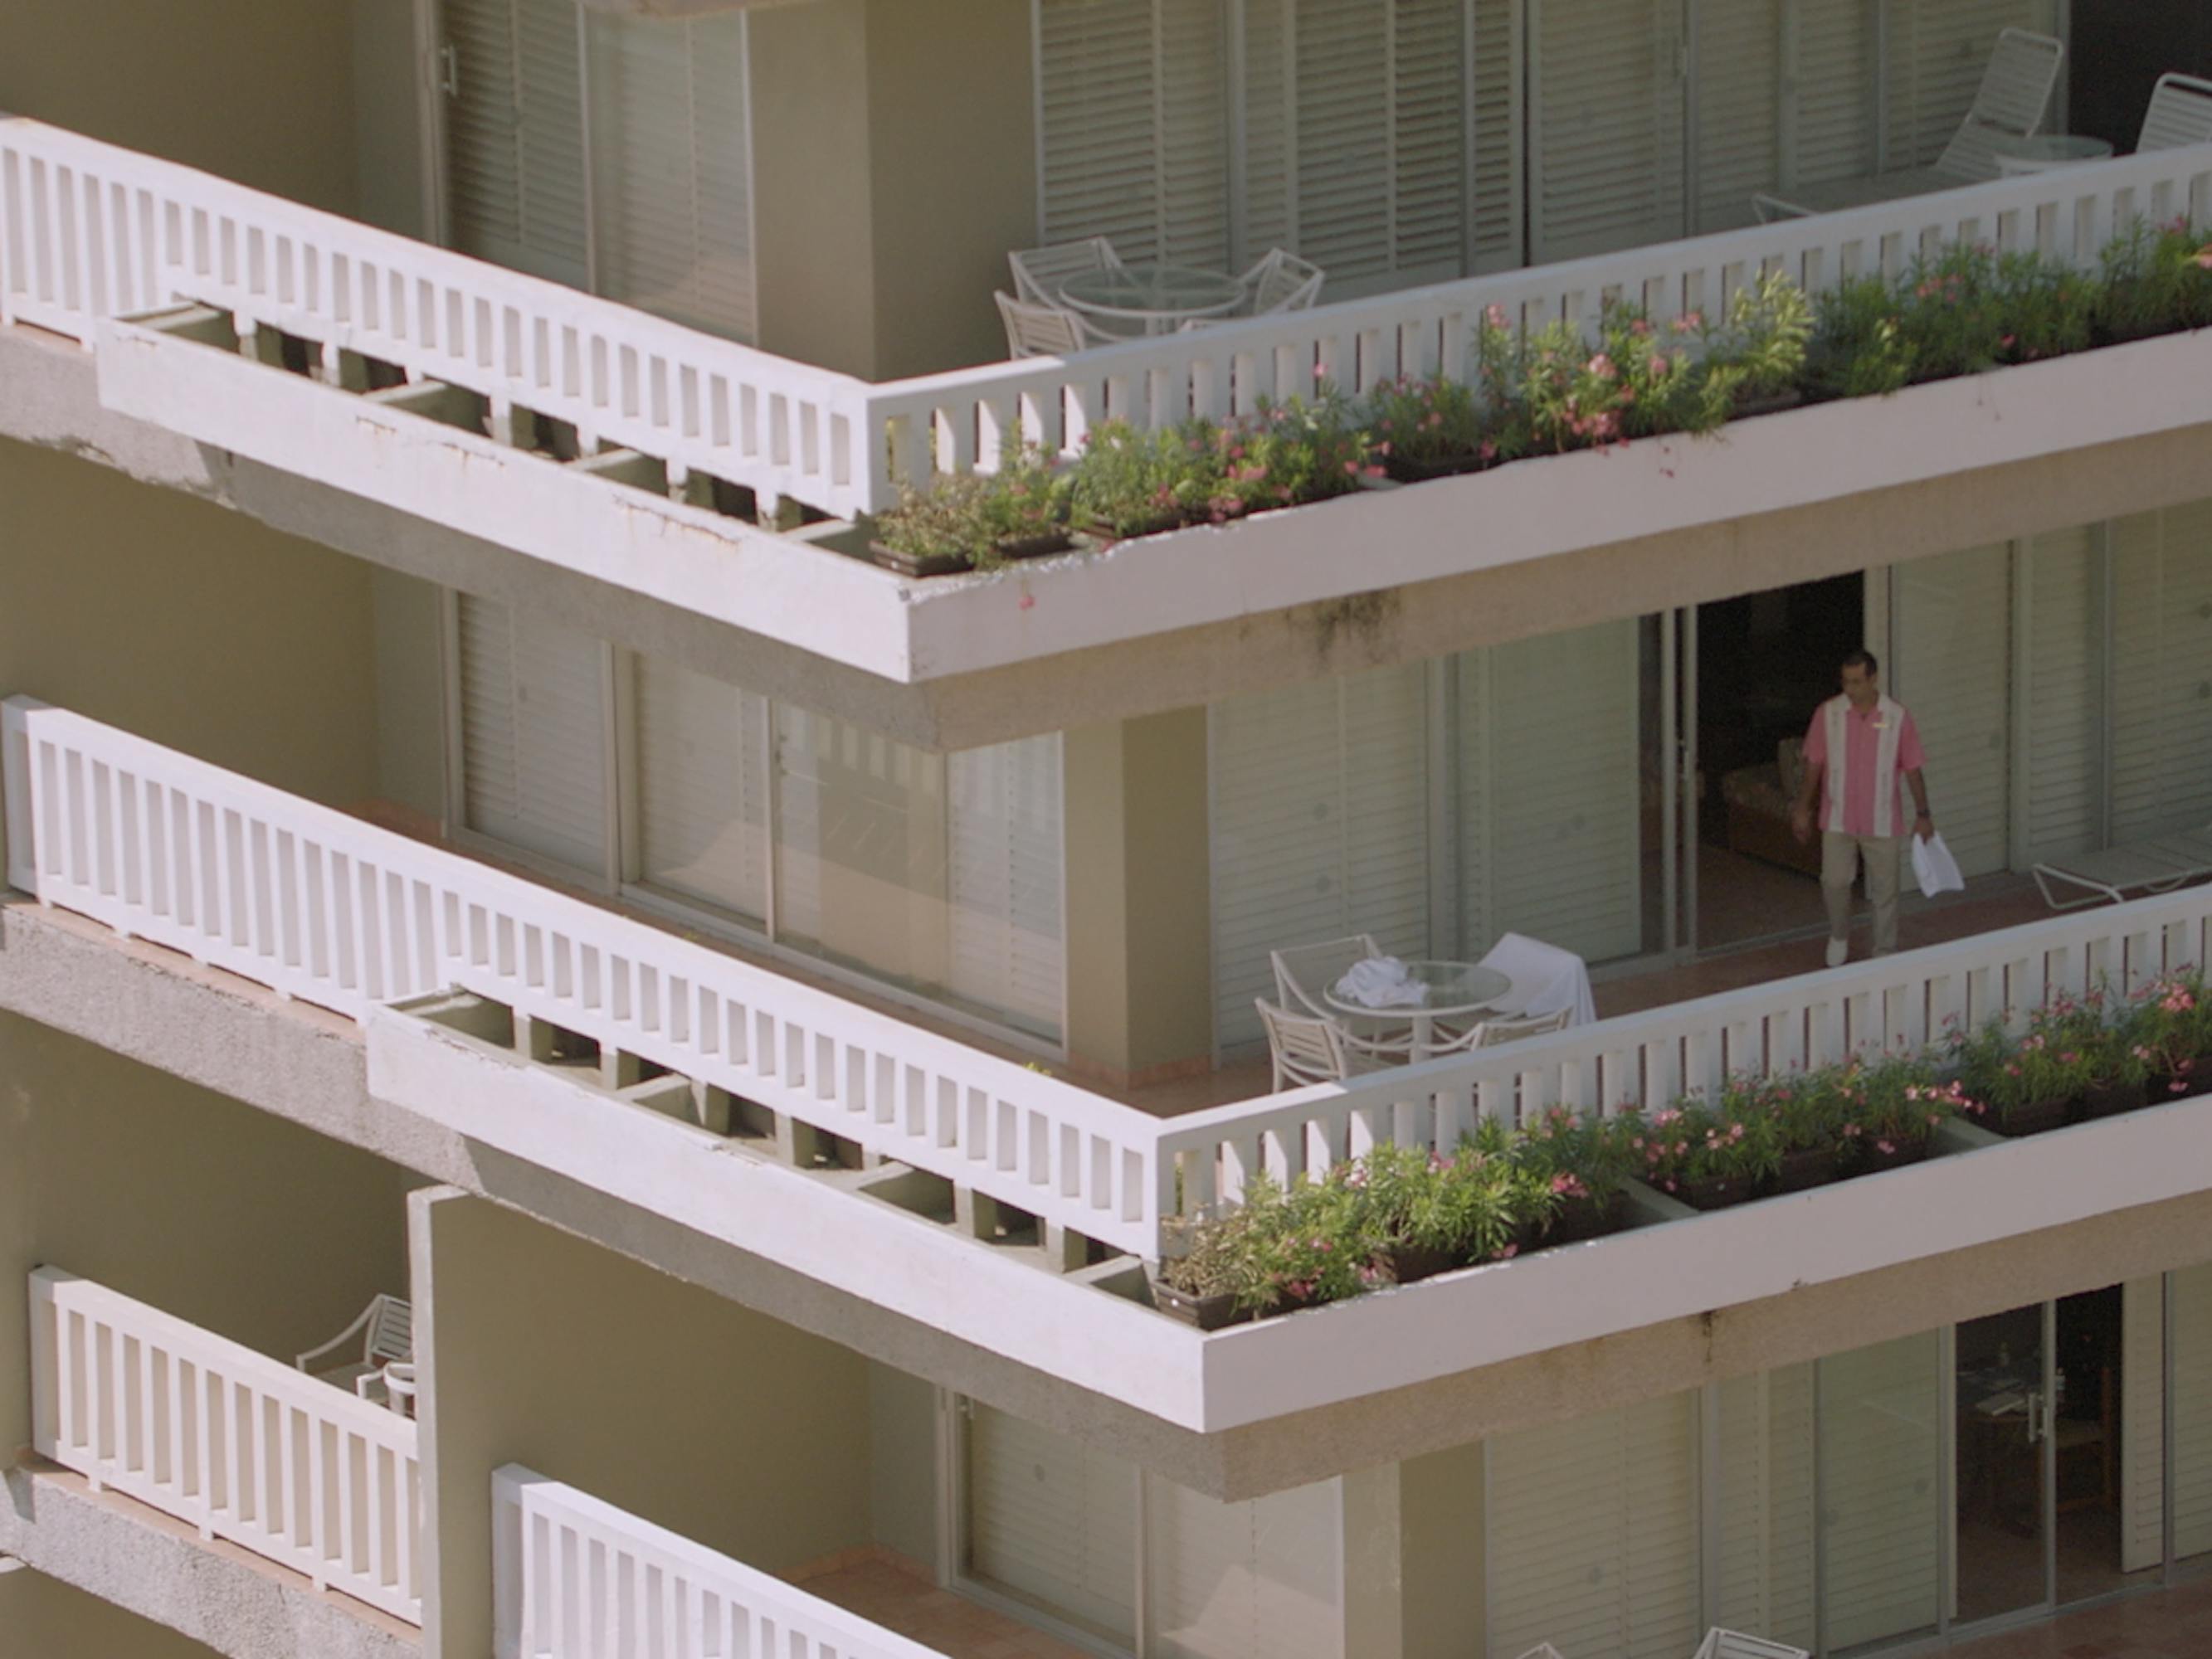 The hotel from Tiempo compartido is white and has many layers. A few of the balconies picture have gardens and outdoor chairs.